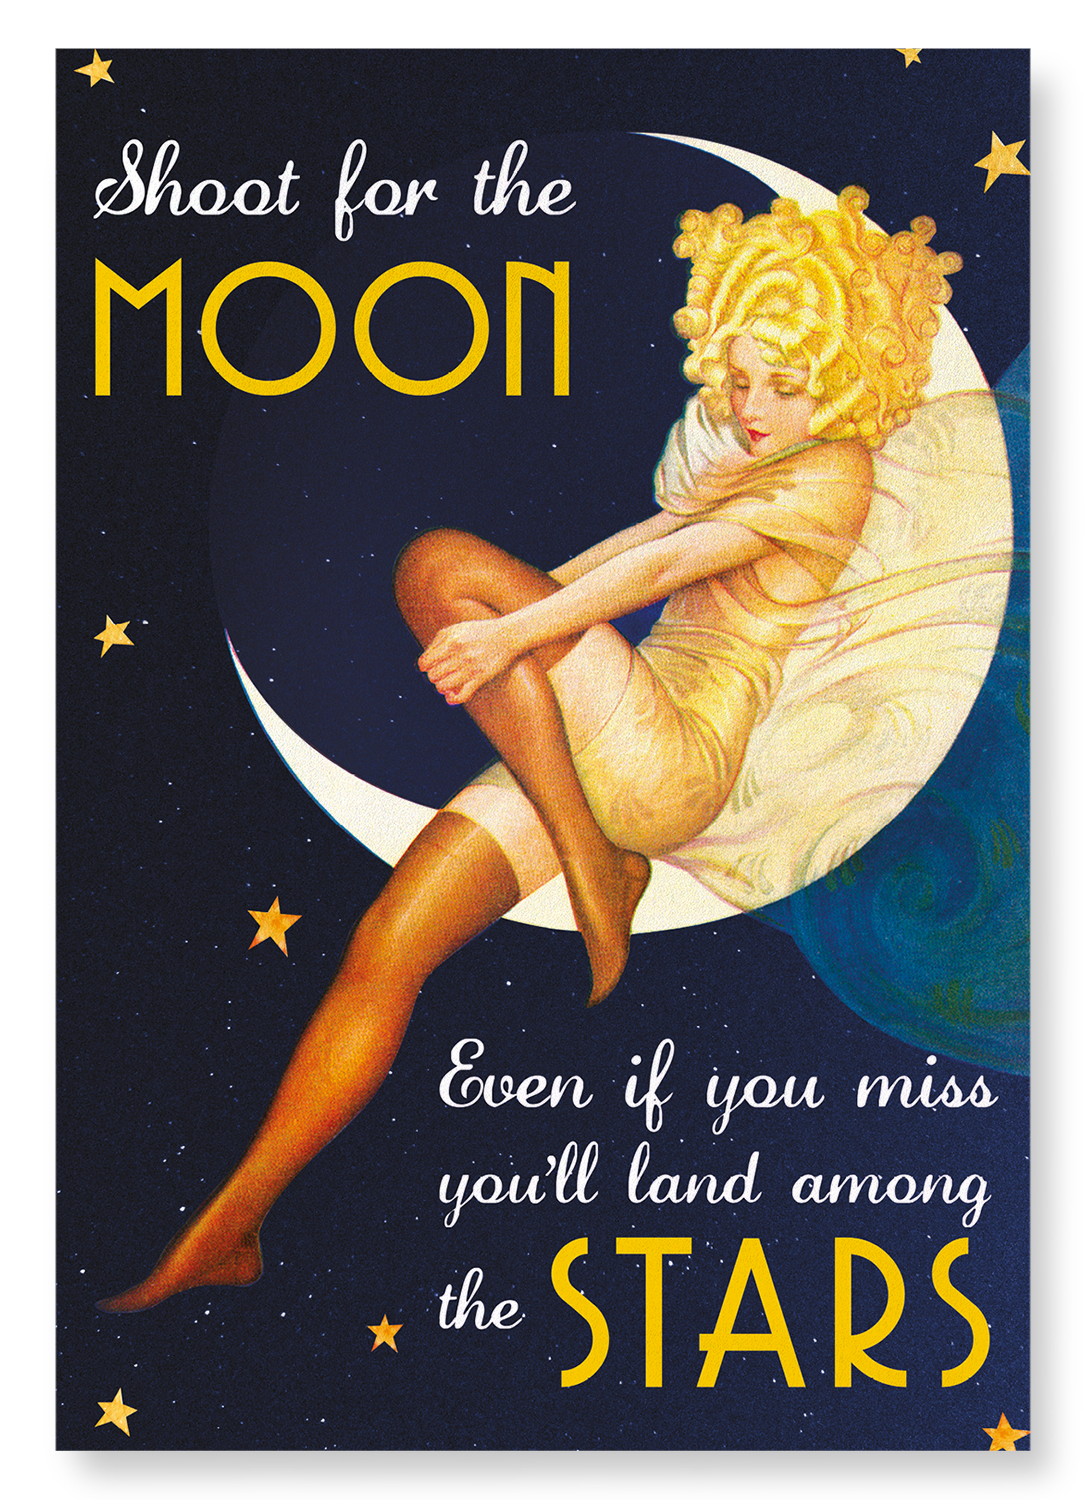 SHOOT FOR THE MOON: Vintage Art Print